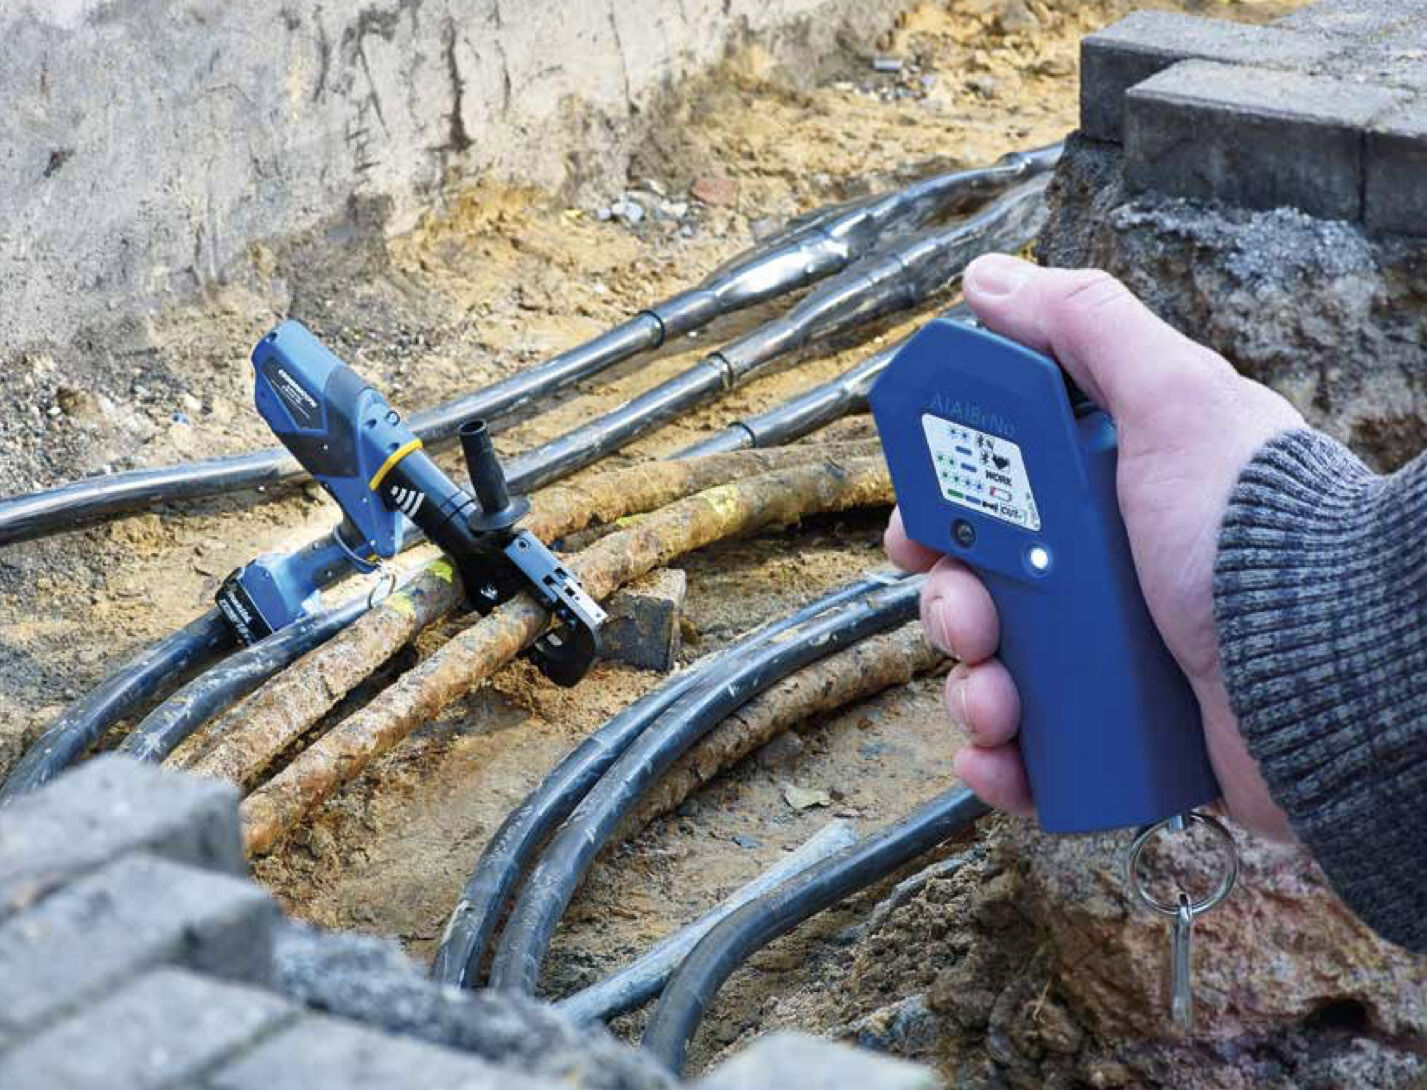 First remote-controlled cable cutter with blade position sensor – ensures cable is completely cut through